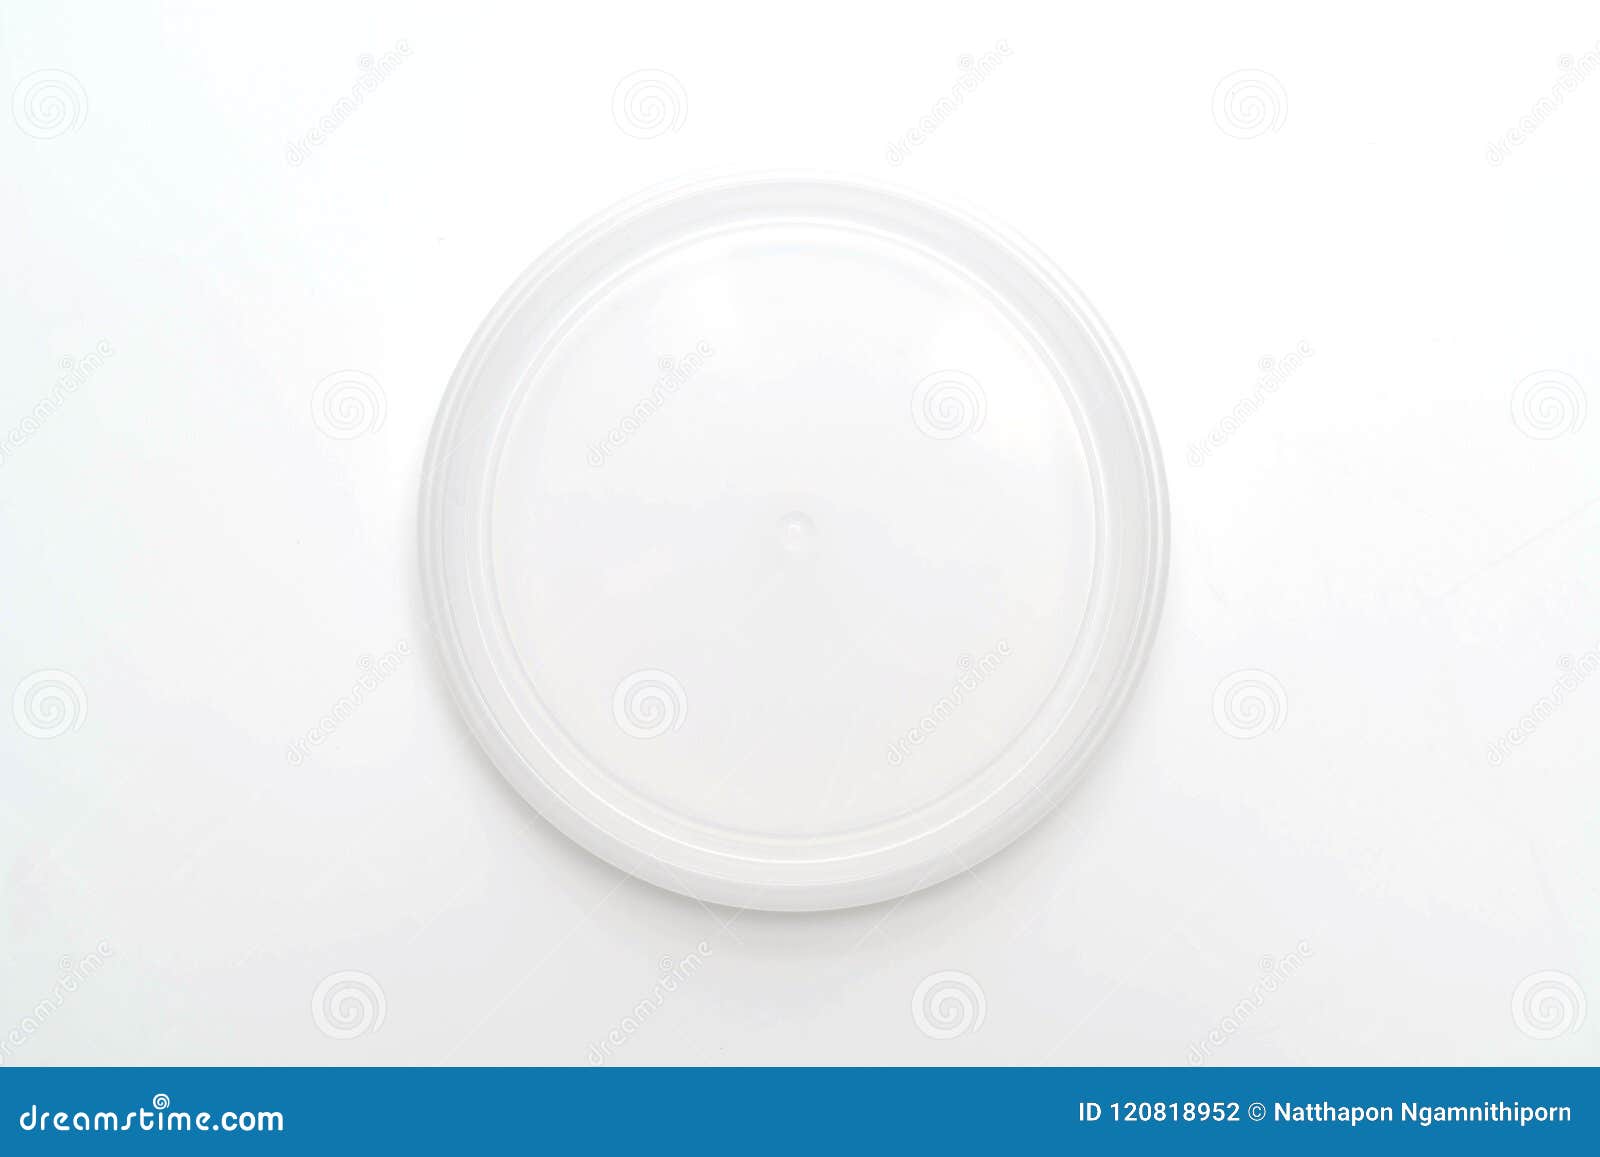 lid of packaging on white